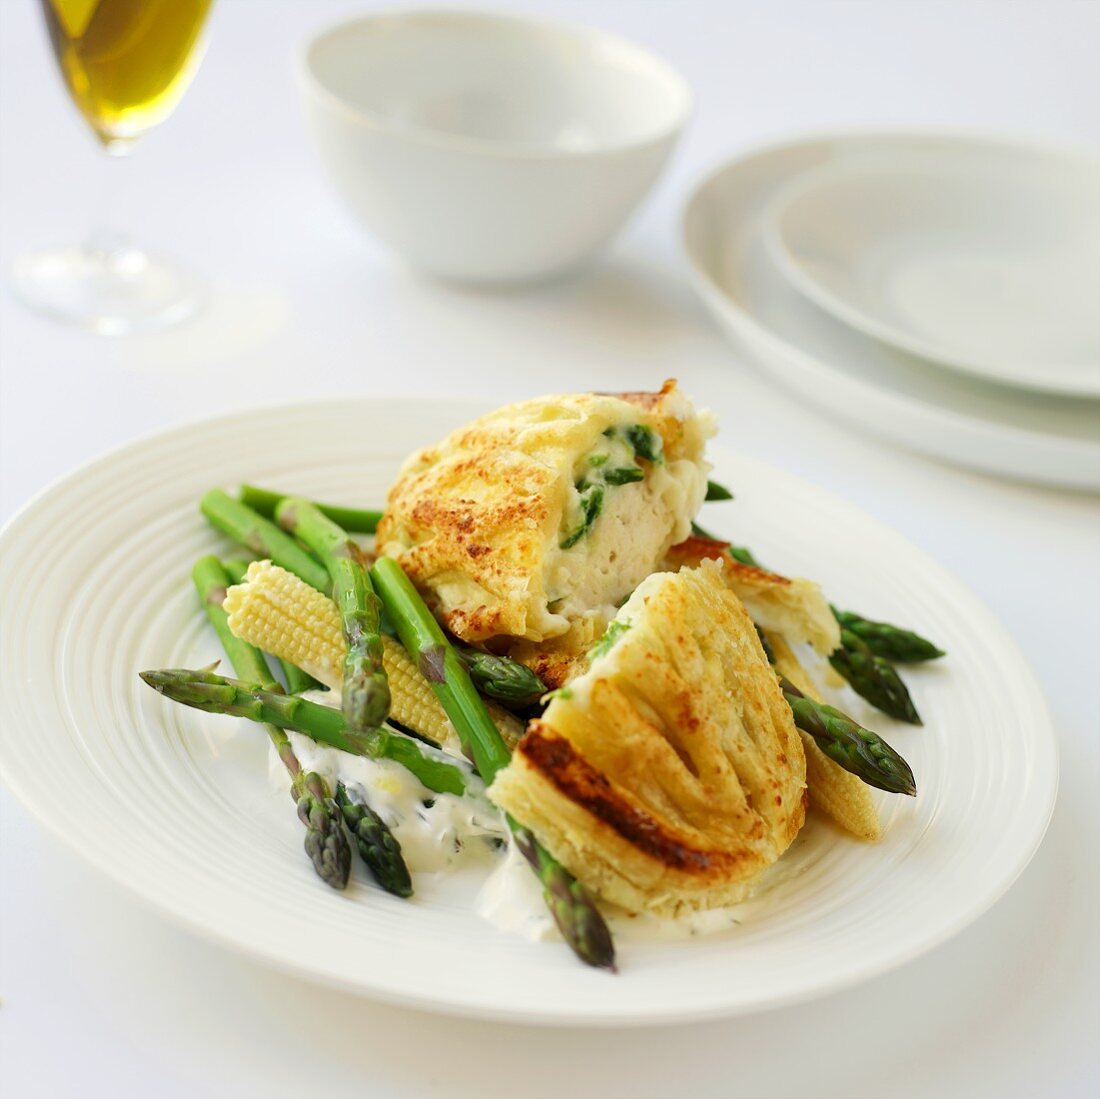 Chicken breast in pastry with asparagus and baby corn cobs